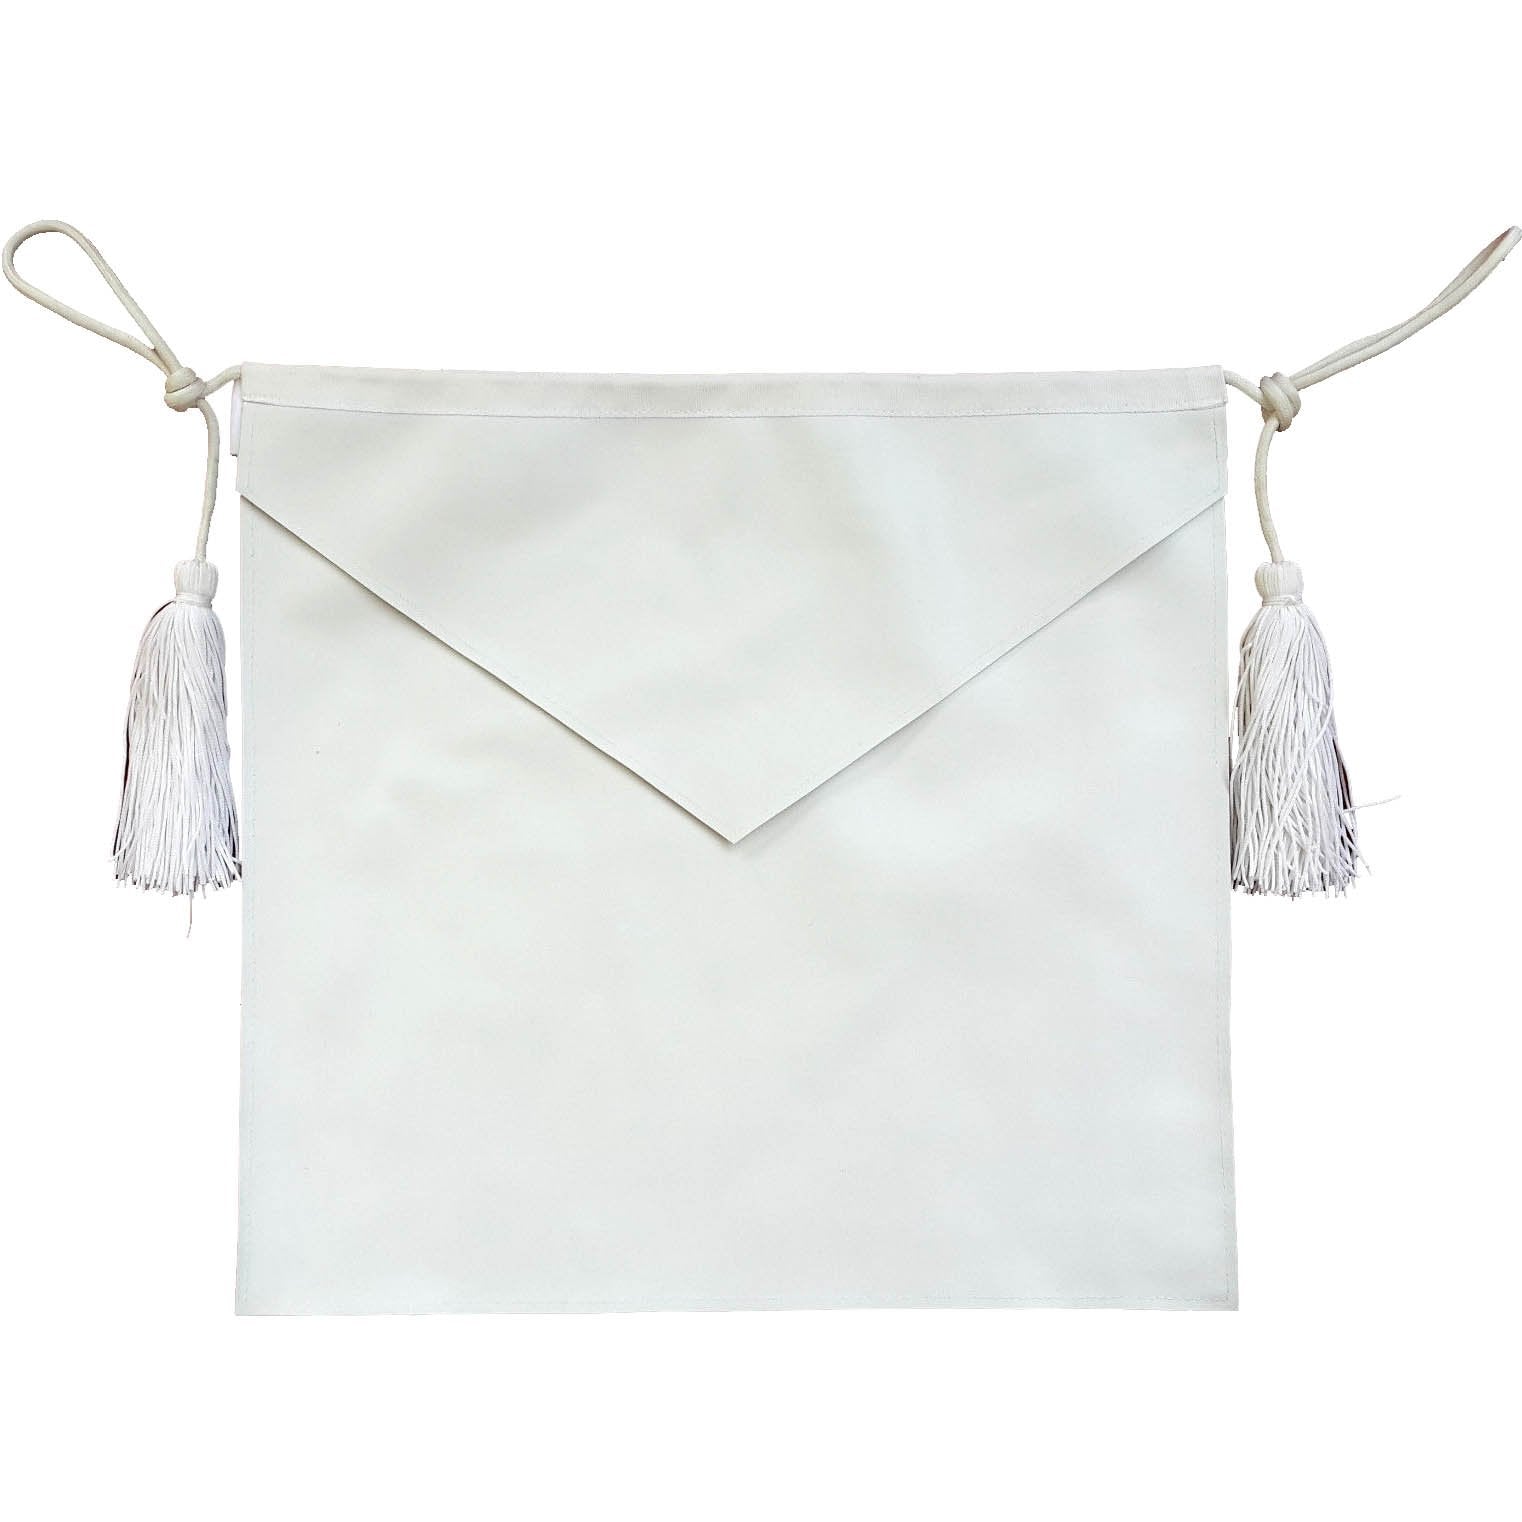 Entered Apprentice Blue Lodge Apron - All White Leather with Cords - Bricks Masons